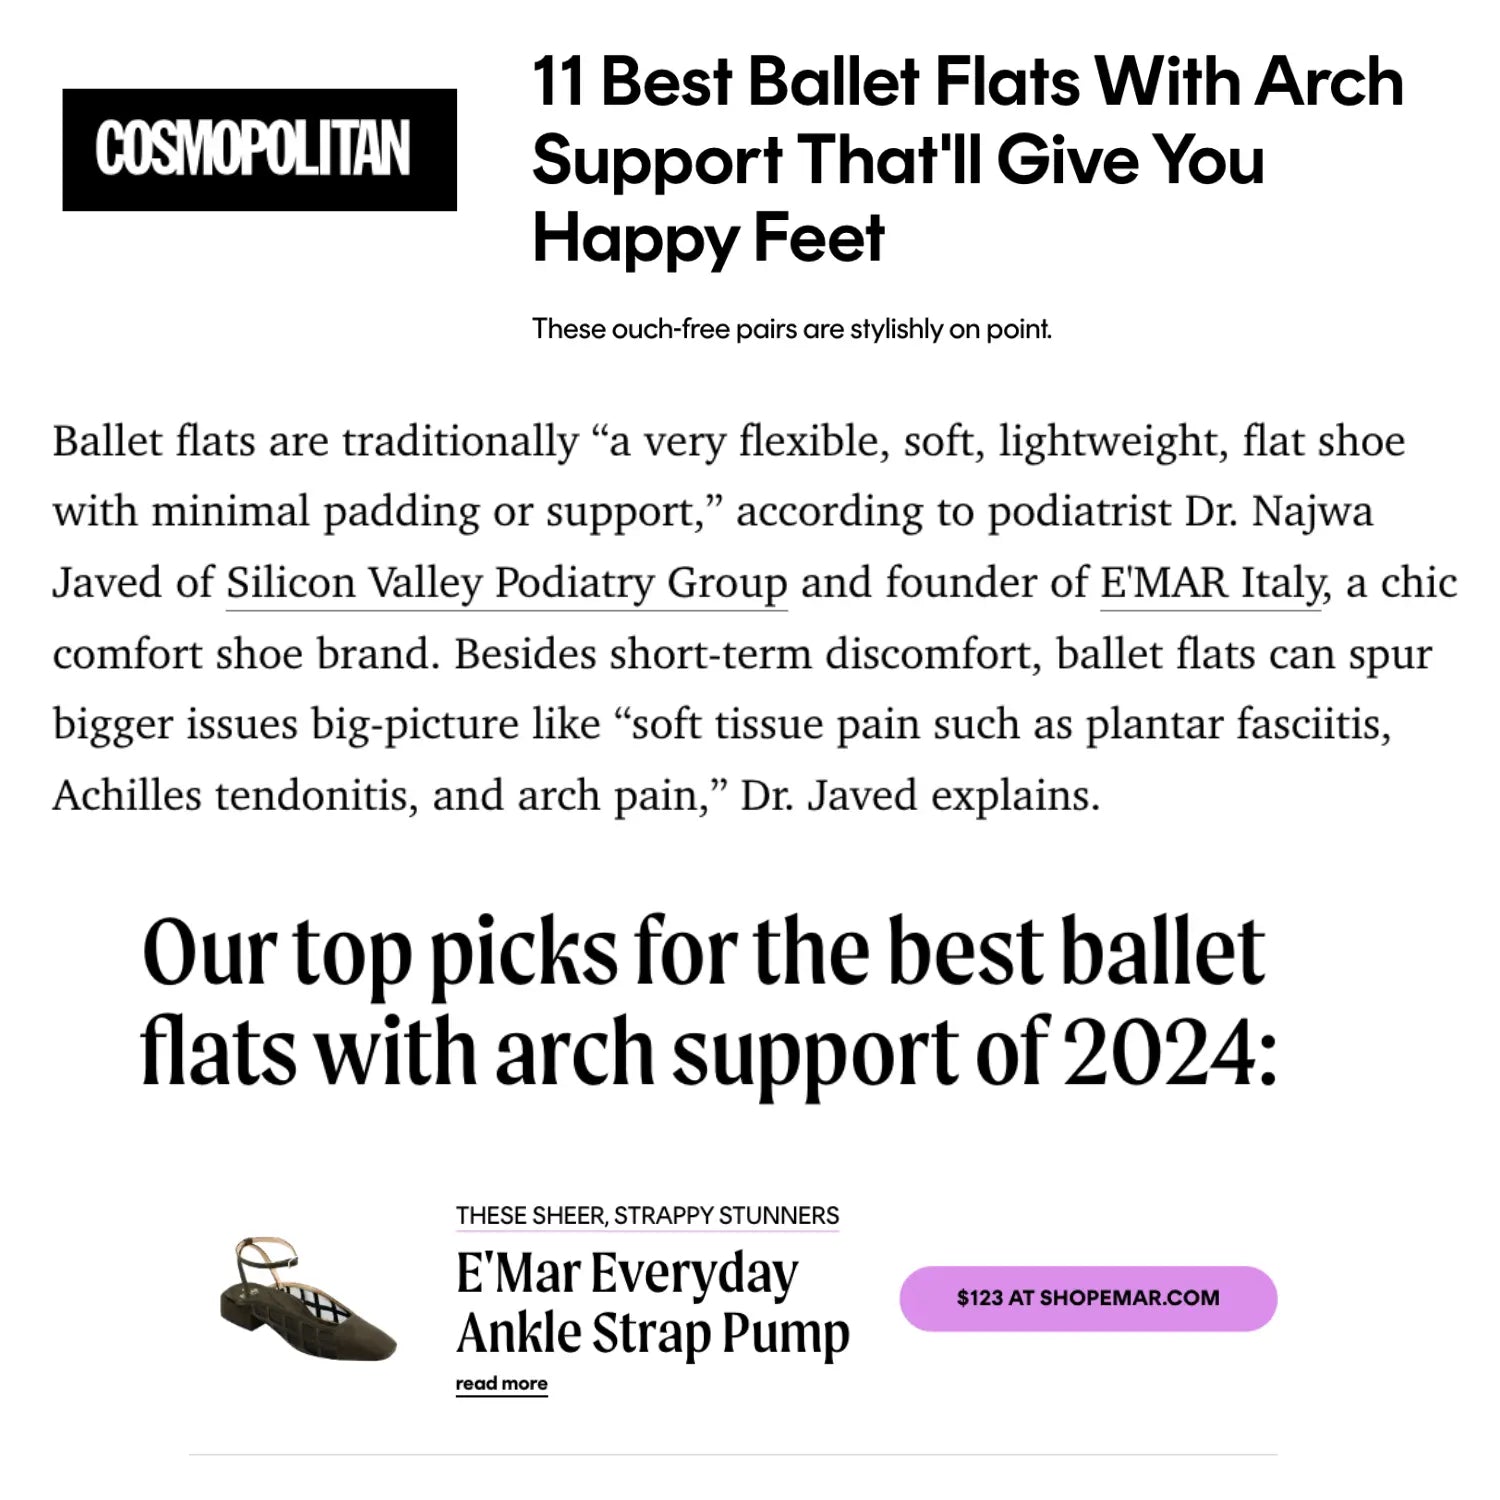 11 Best Ballet Flats With Arch Support - Cosmopolitan Press